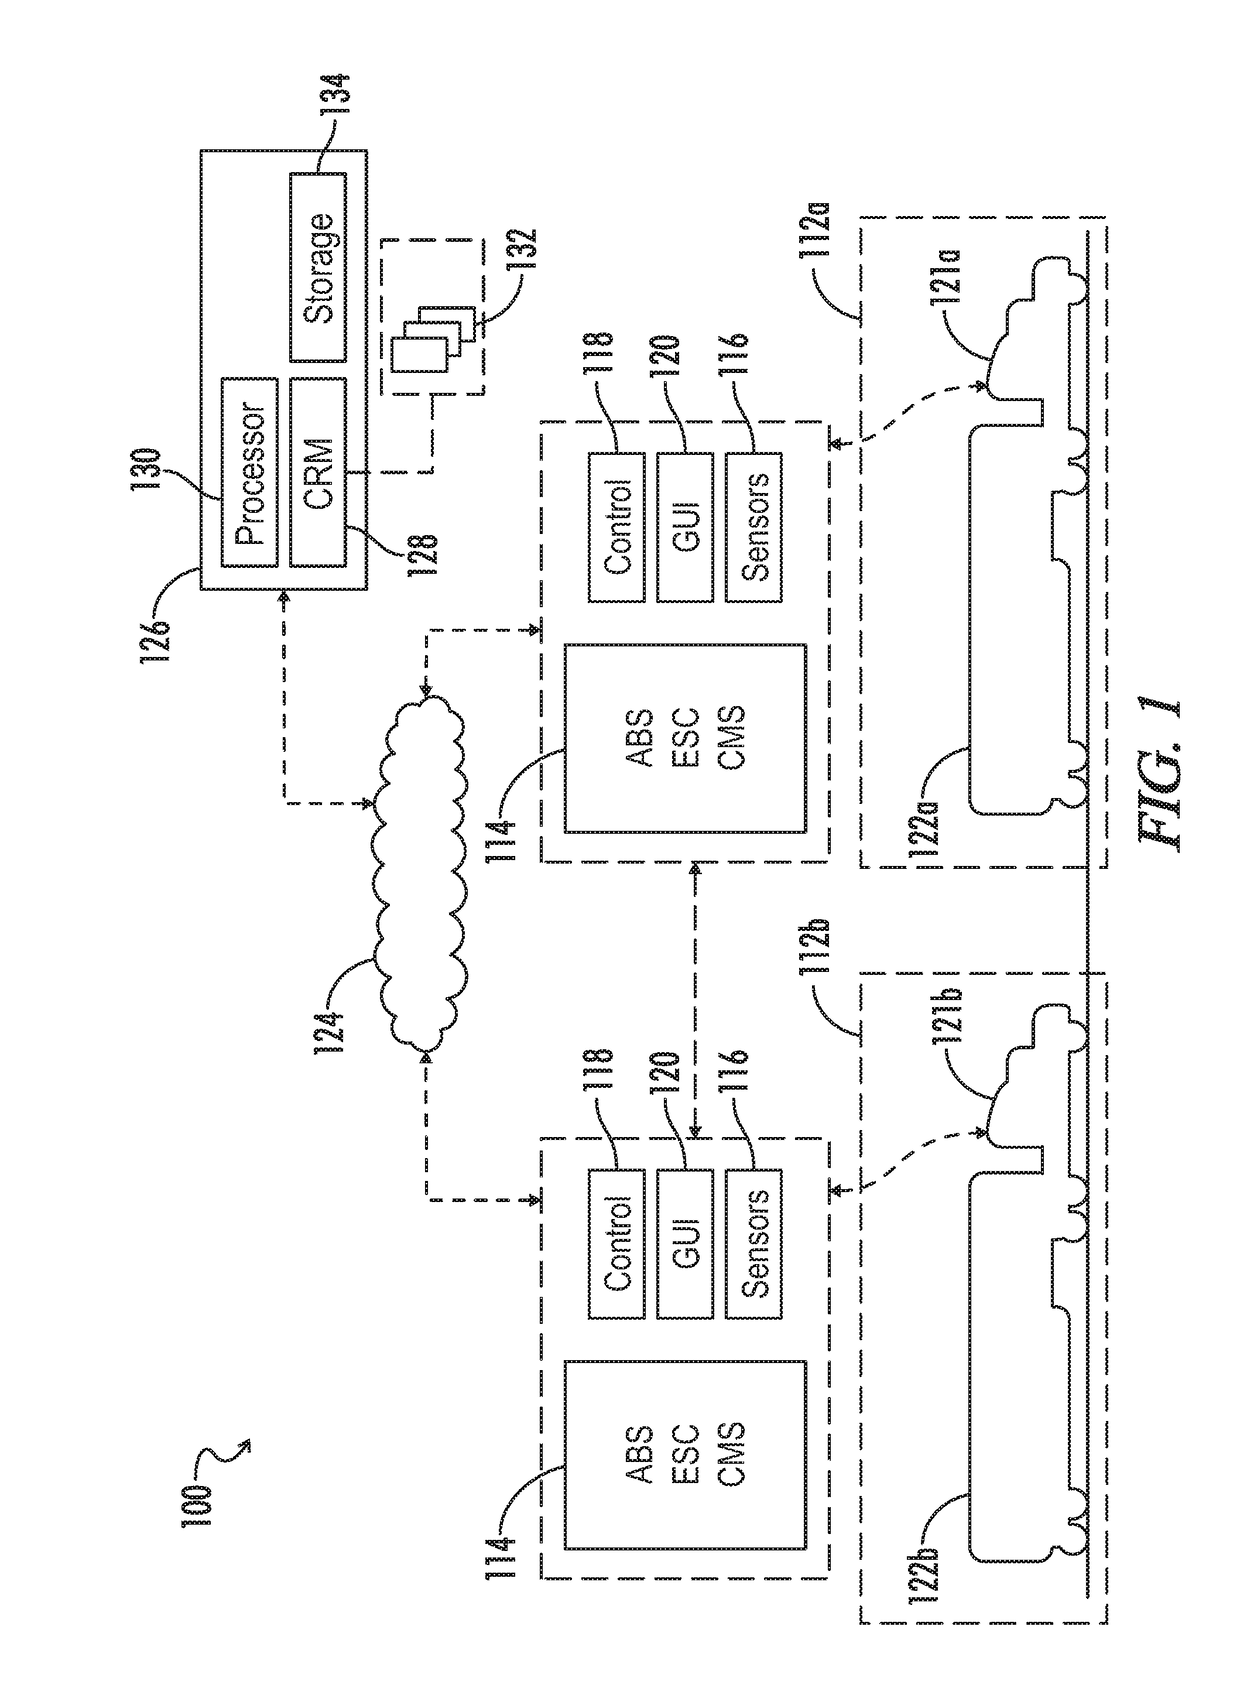 System and method for adjusting vehicle platoon distances based on predicted external perturbations